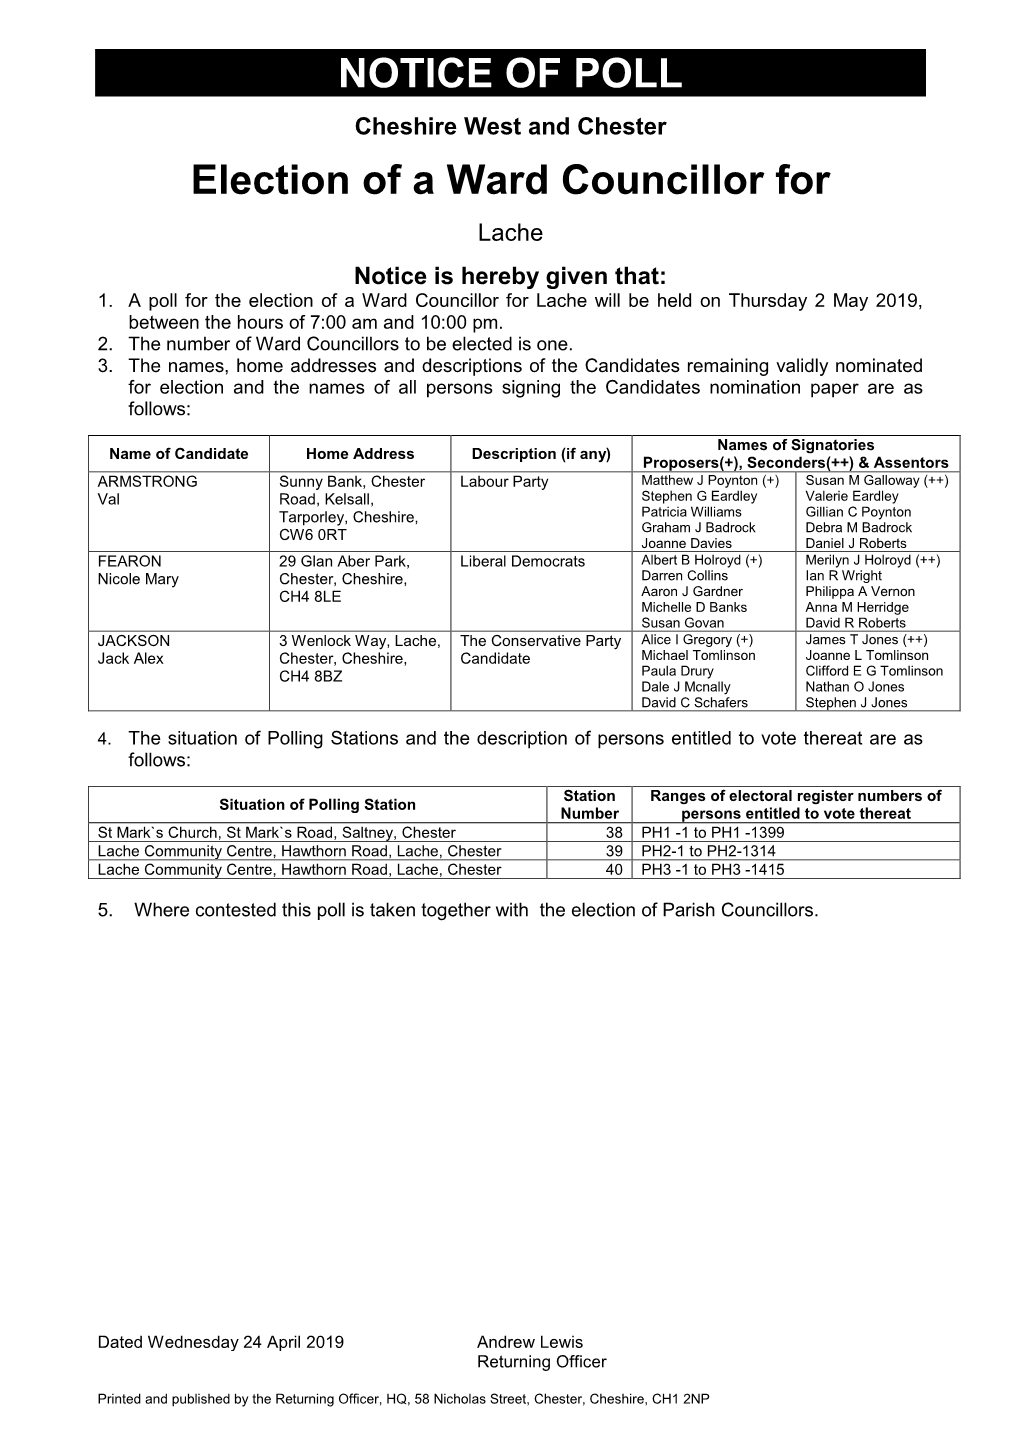 NOTICE of POLL Election of a Ward Councillor